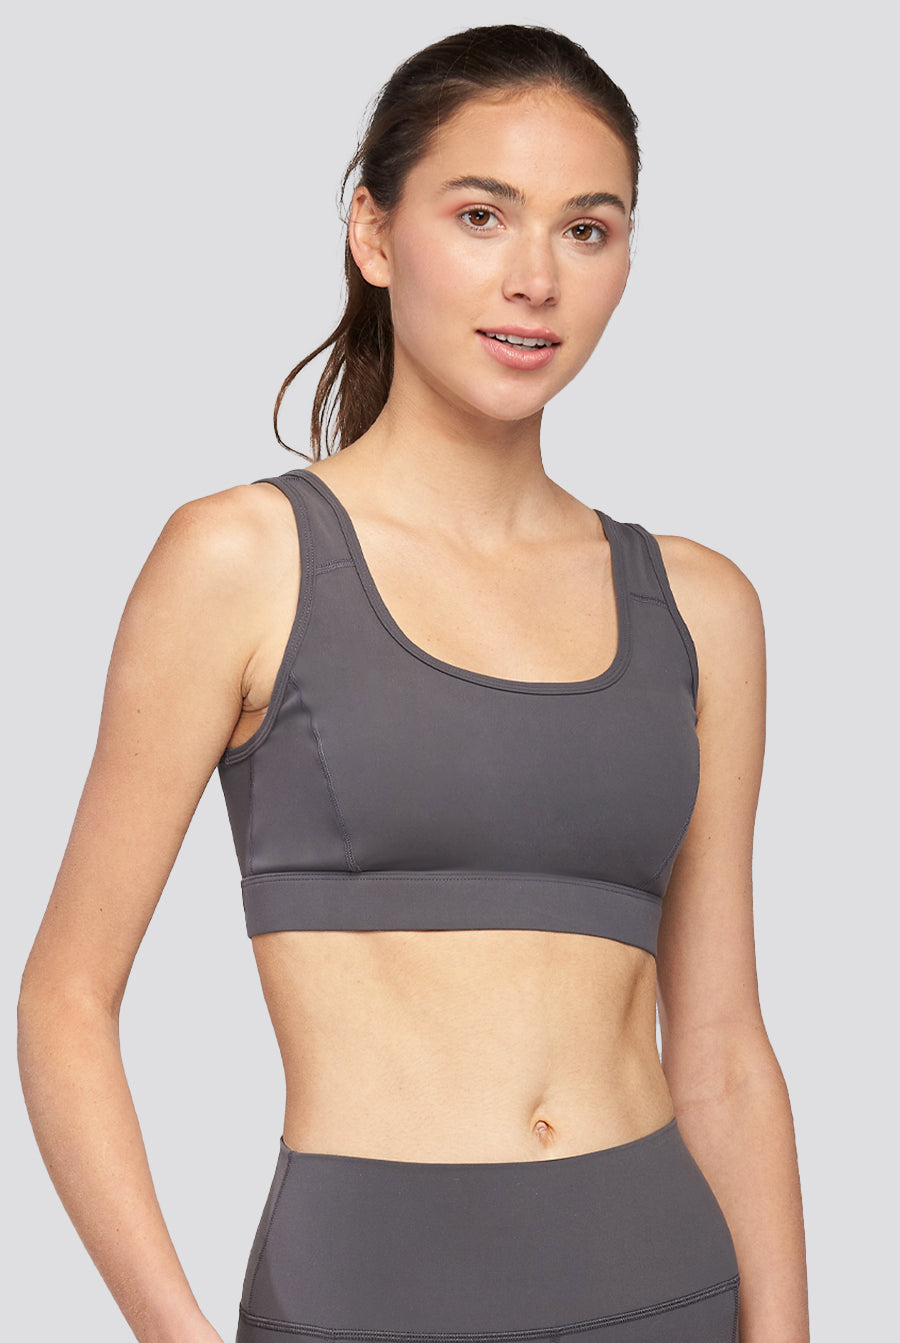 scoop back sports bra Charcoal front